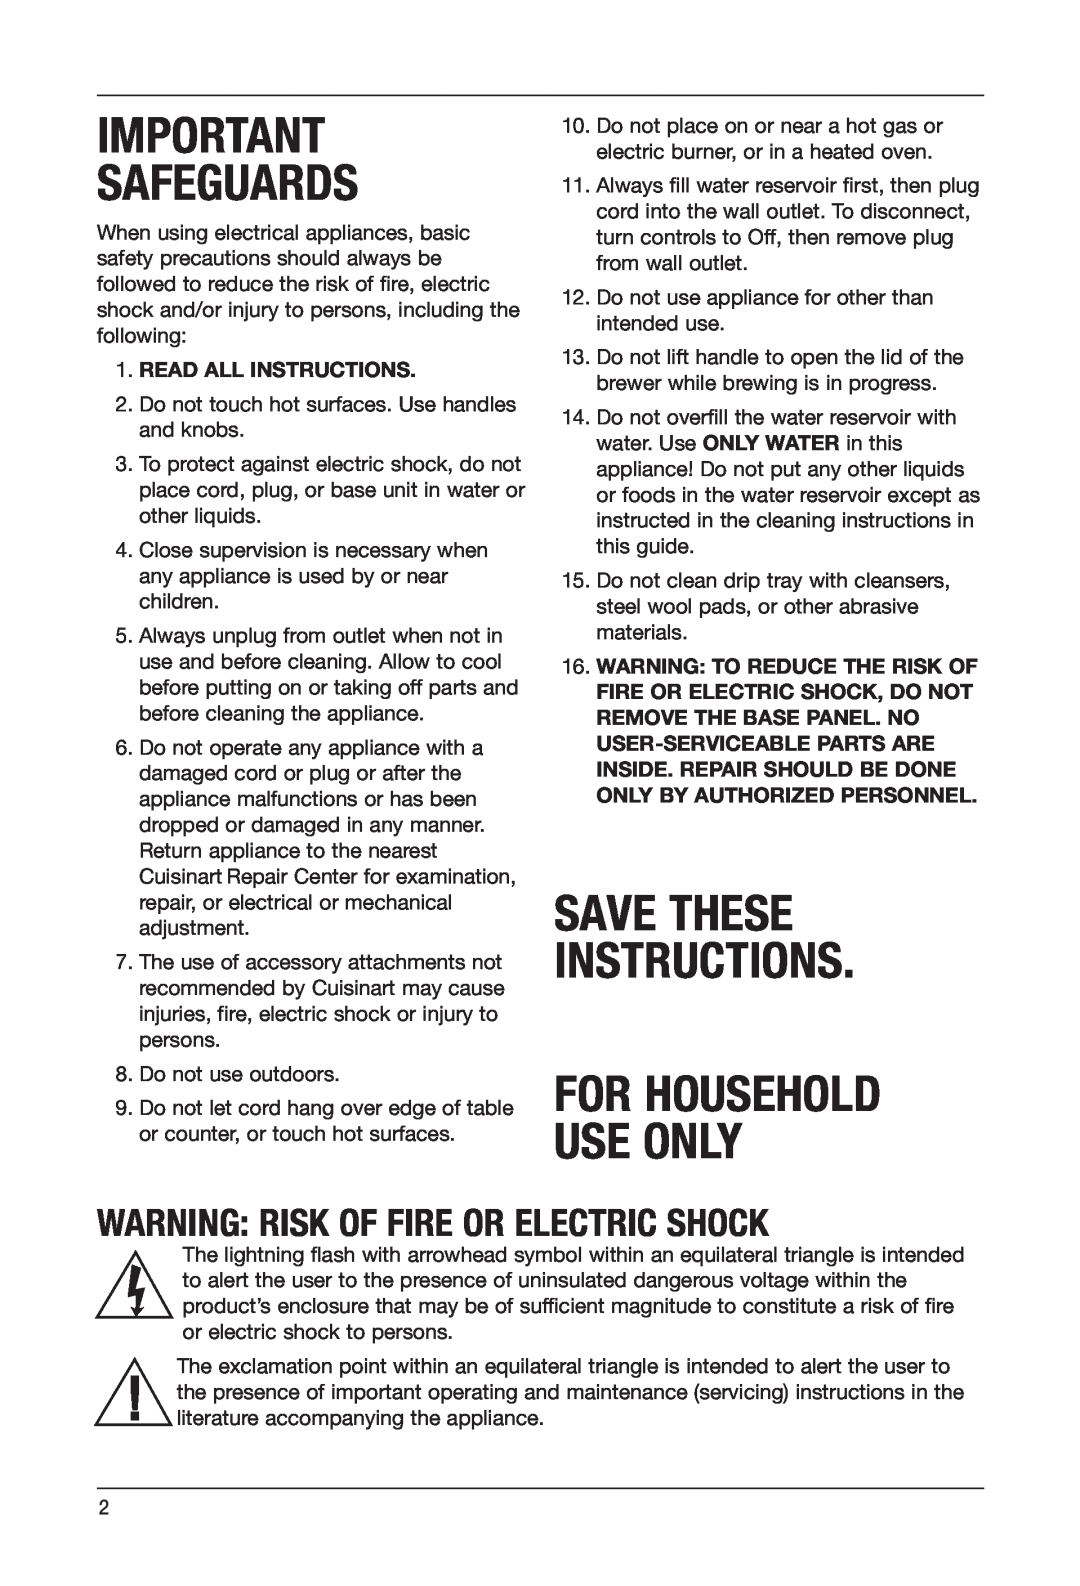 Keurig SS-700 manual For Household Use Only, Warning Risk Of Fire Or Electric Shock, Safeguards, Save These Instructions 